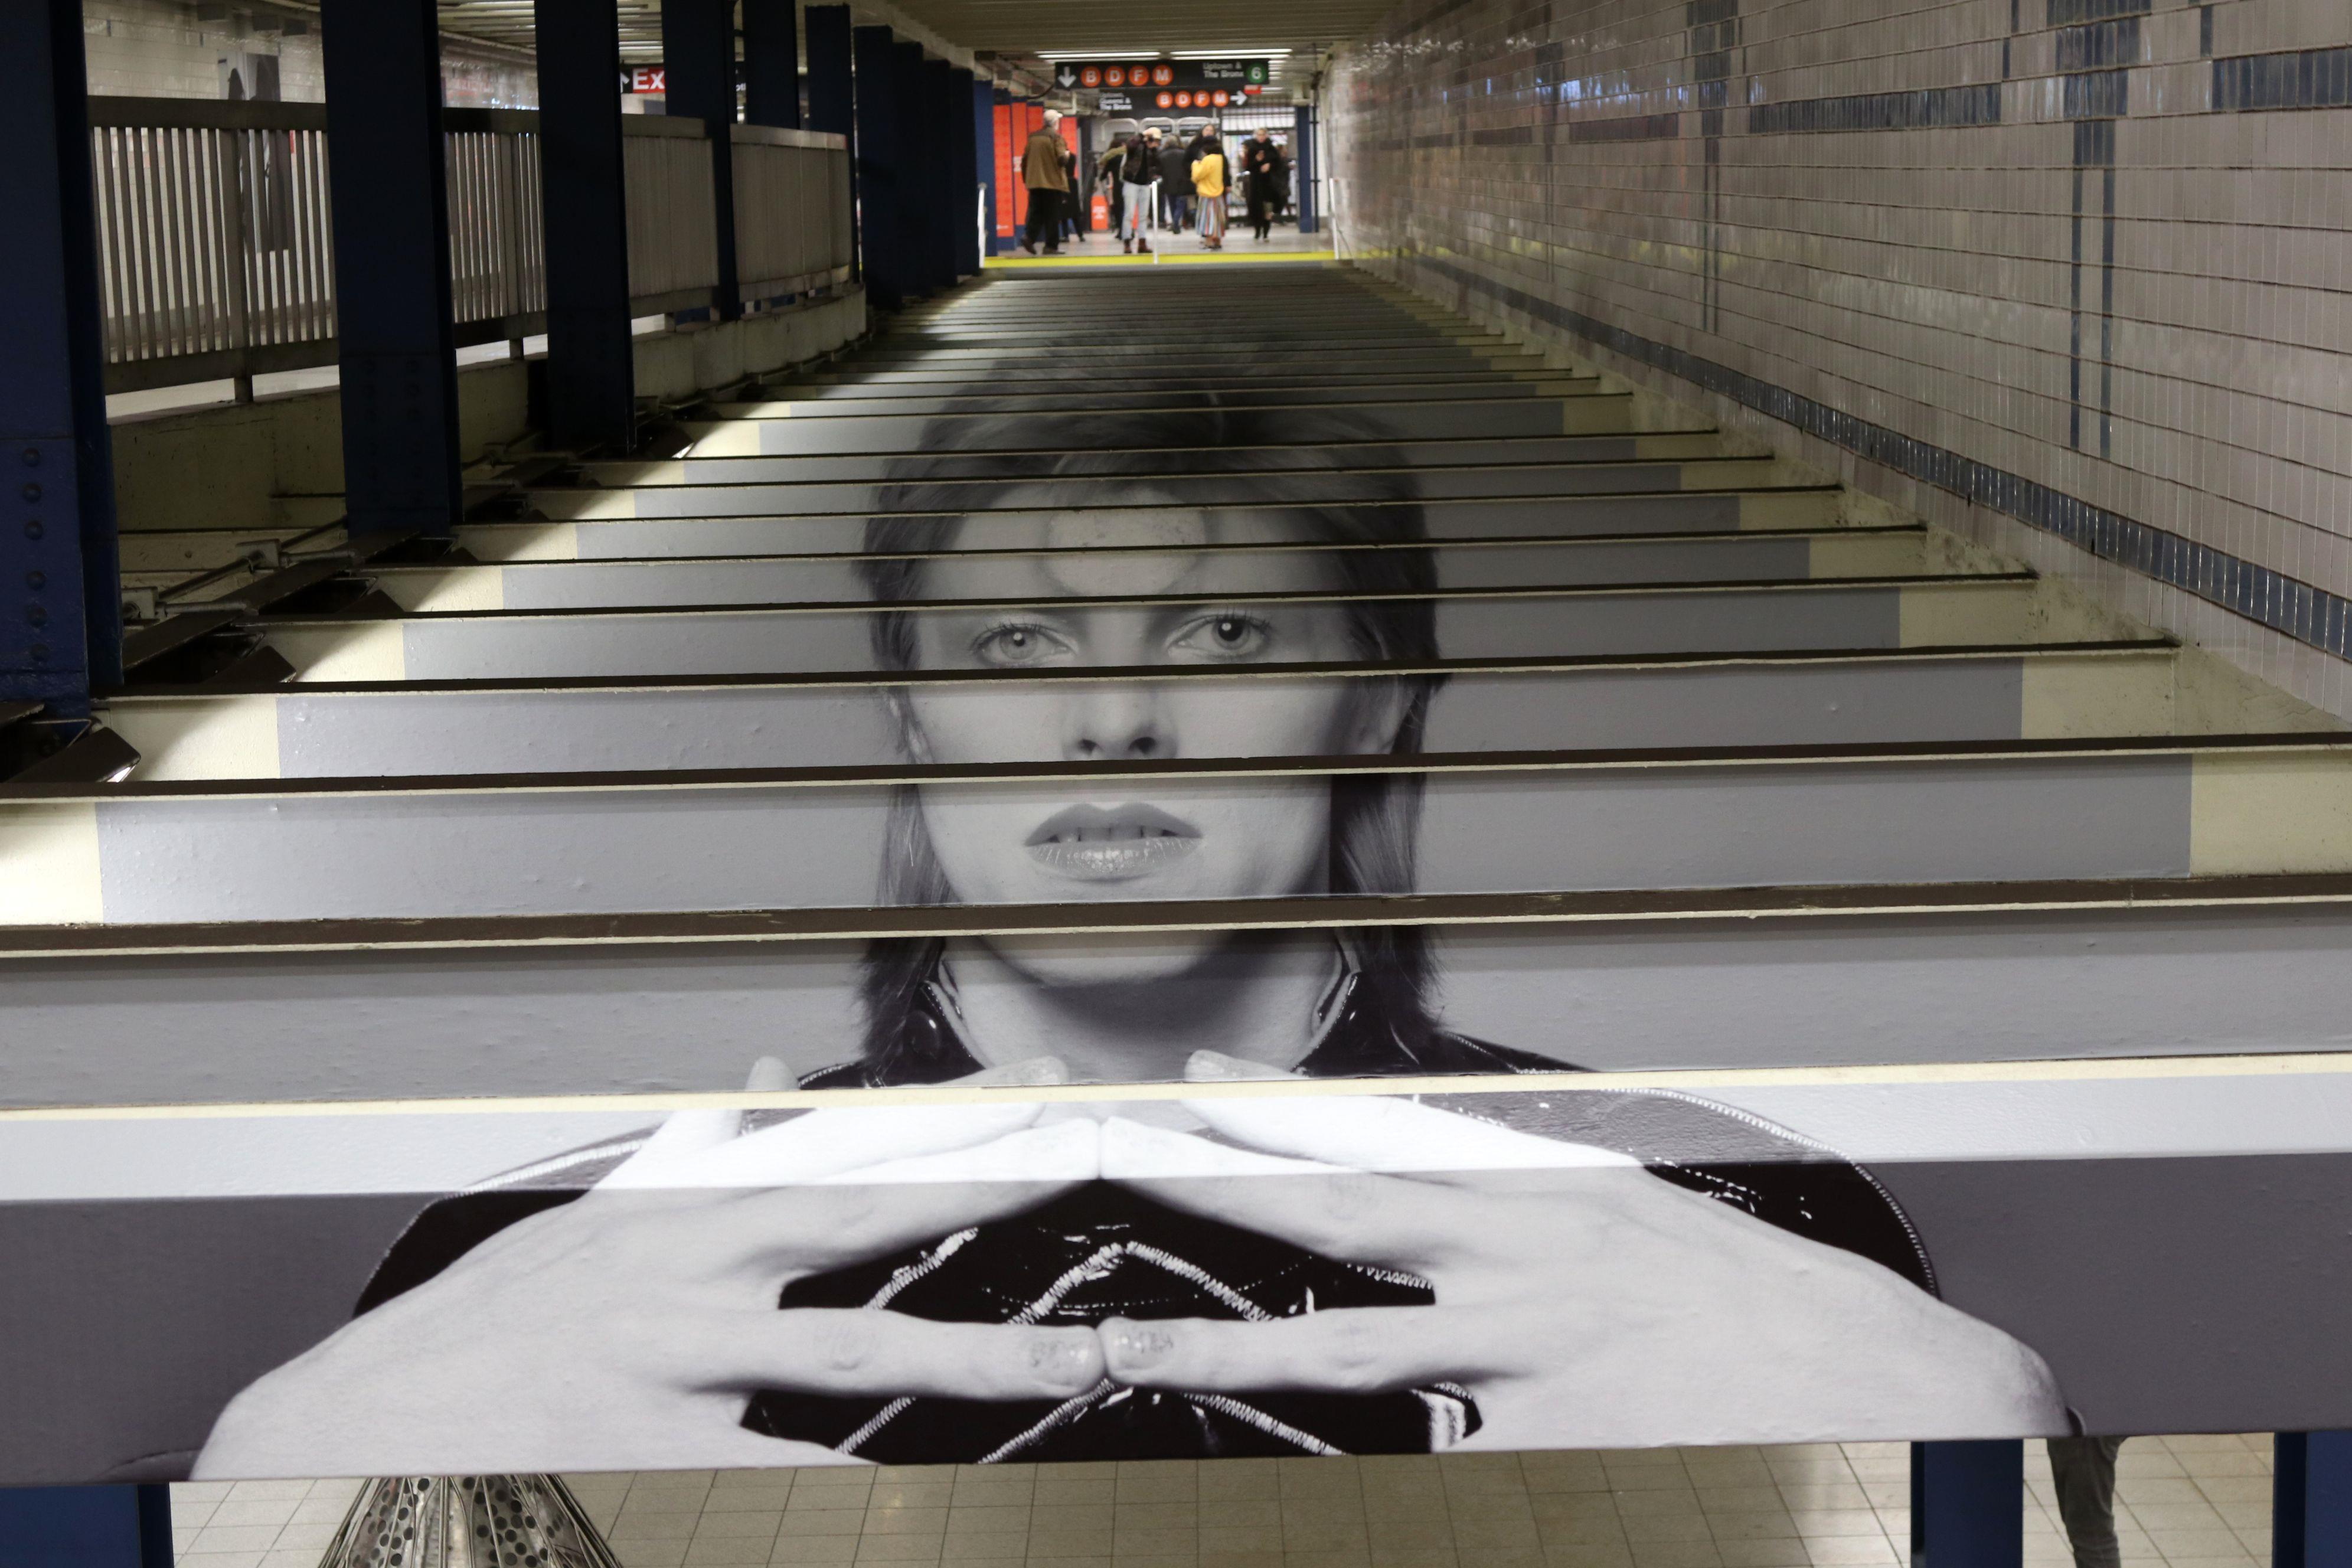 Bowie Images On Display In New York Subway